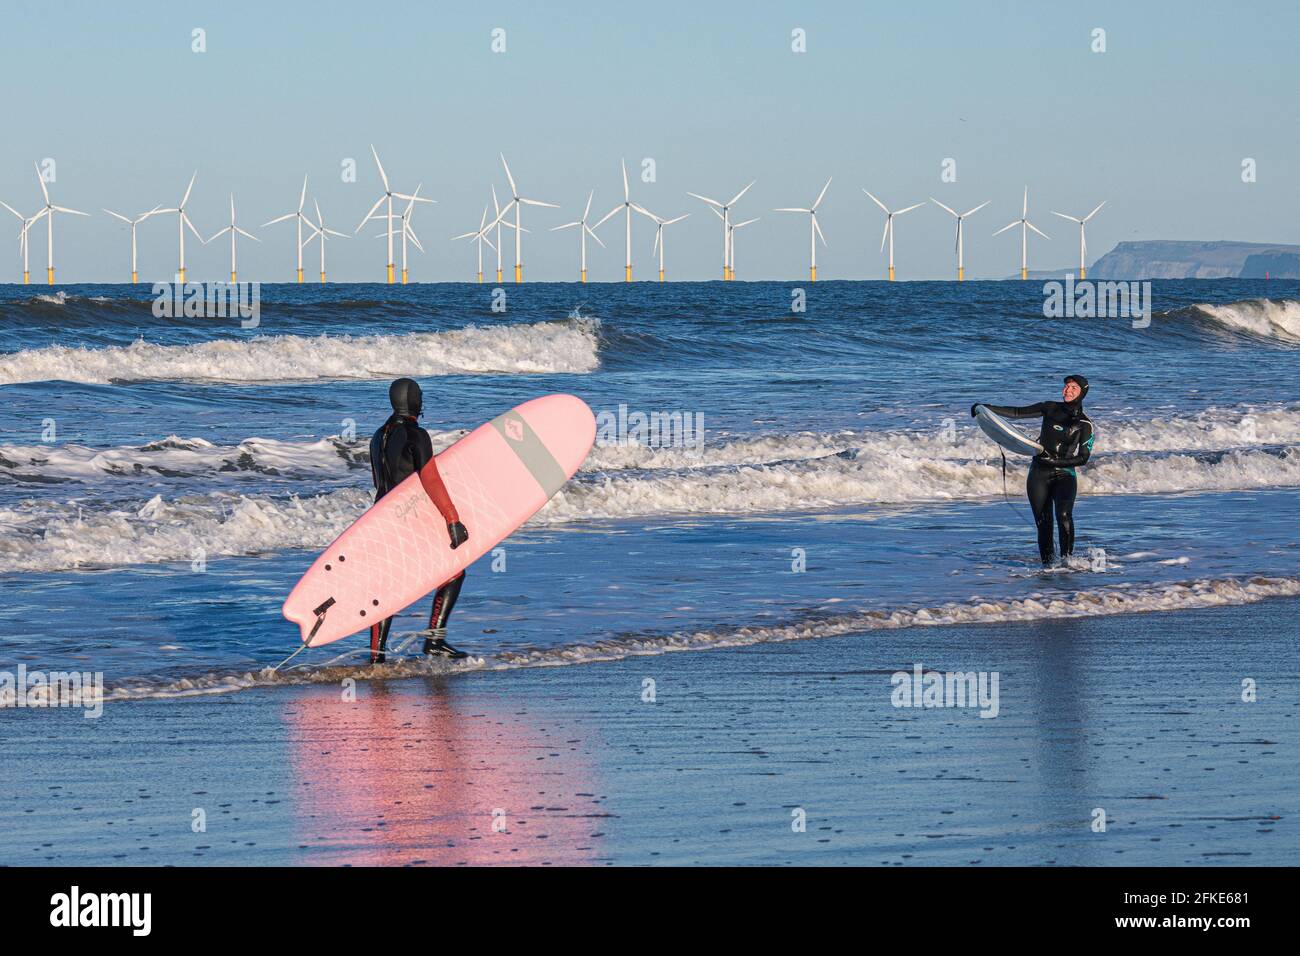 Olivia Harris (Right ) and her friend Rachel surfing at Seaton with  in distance. England, UK Stock Photo